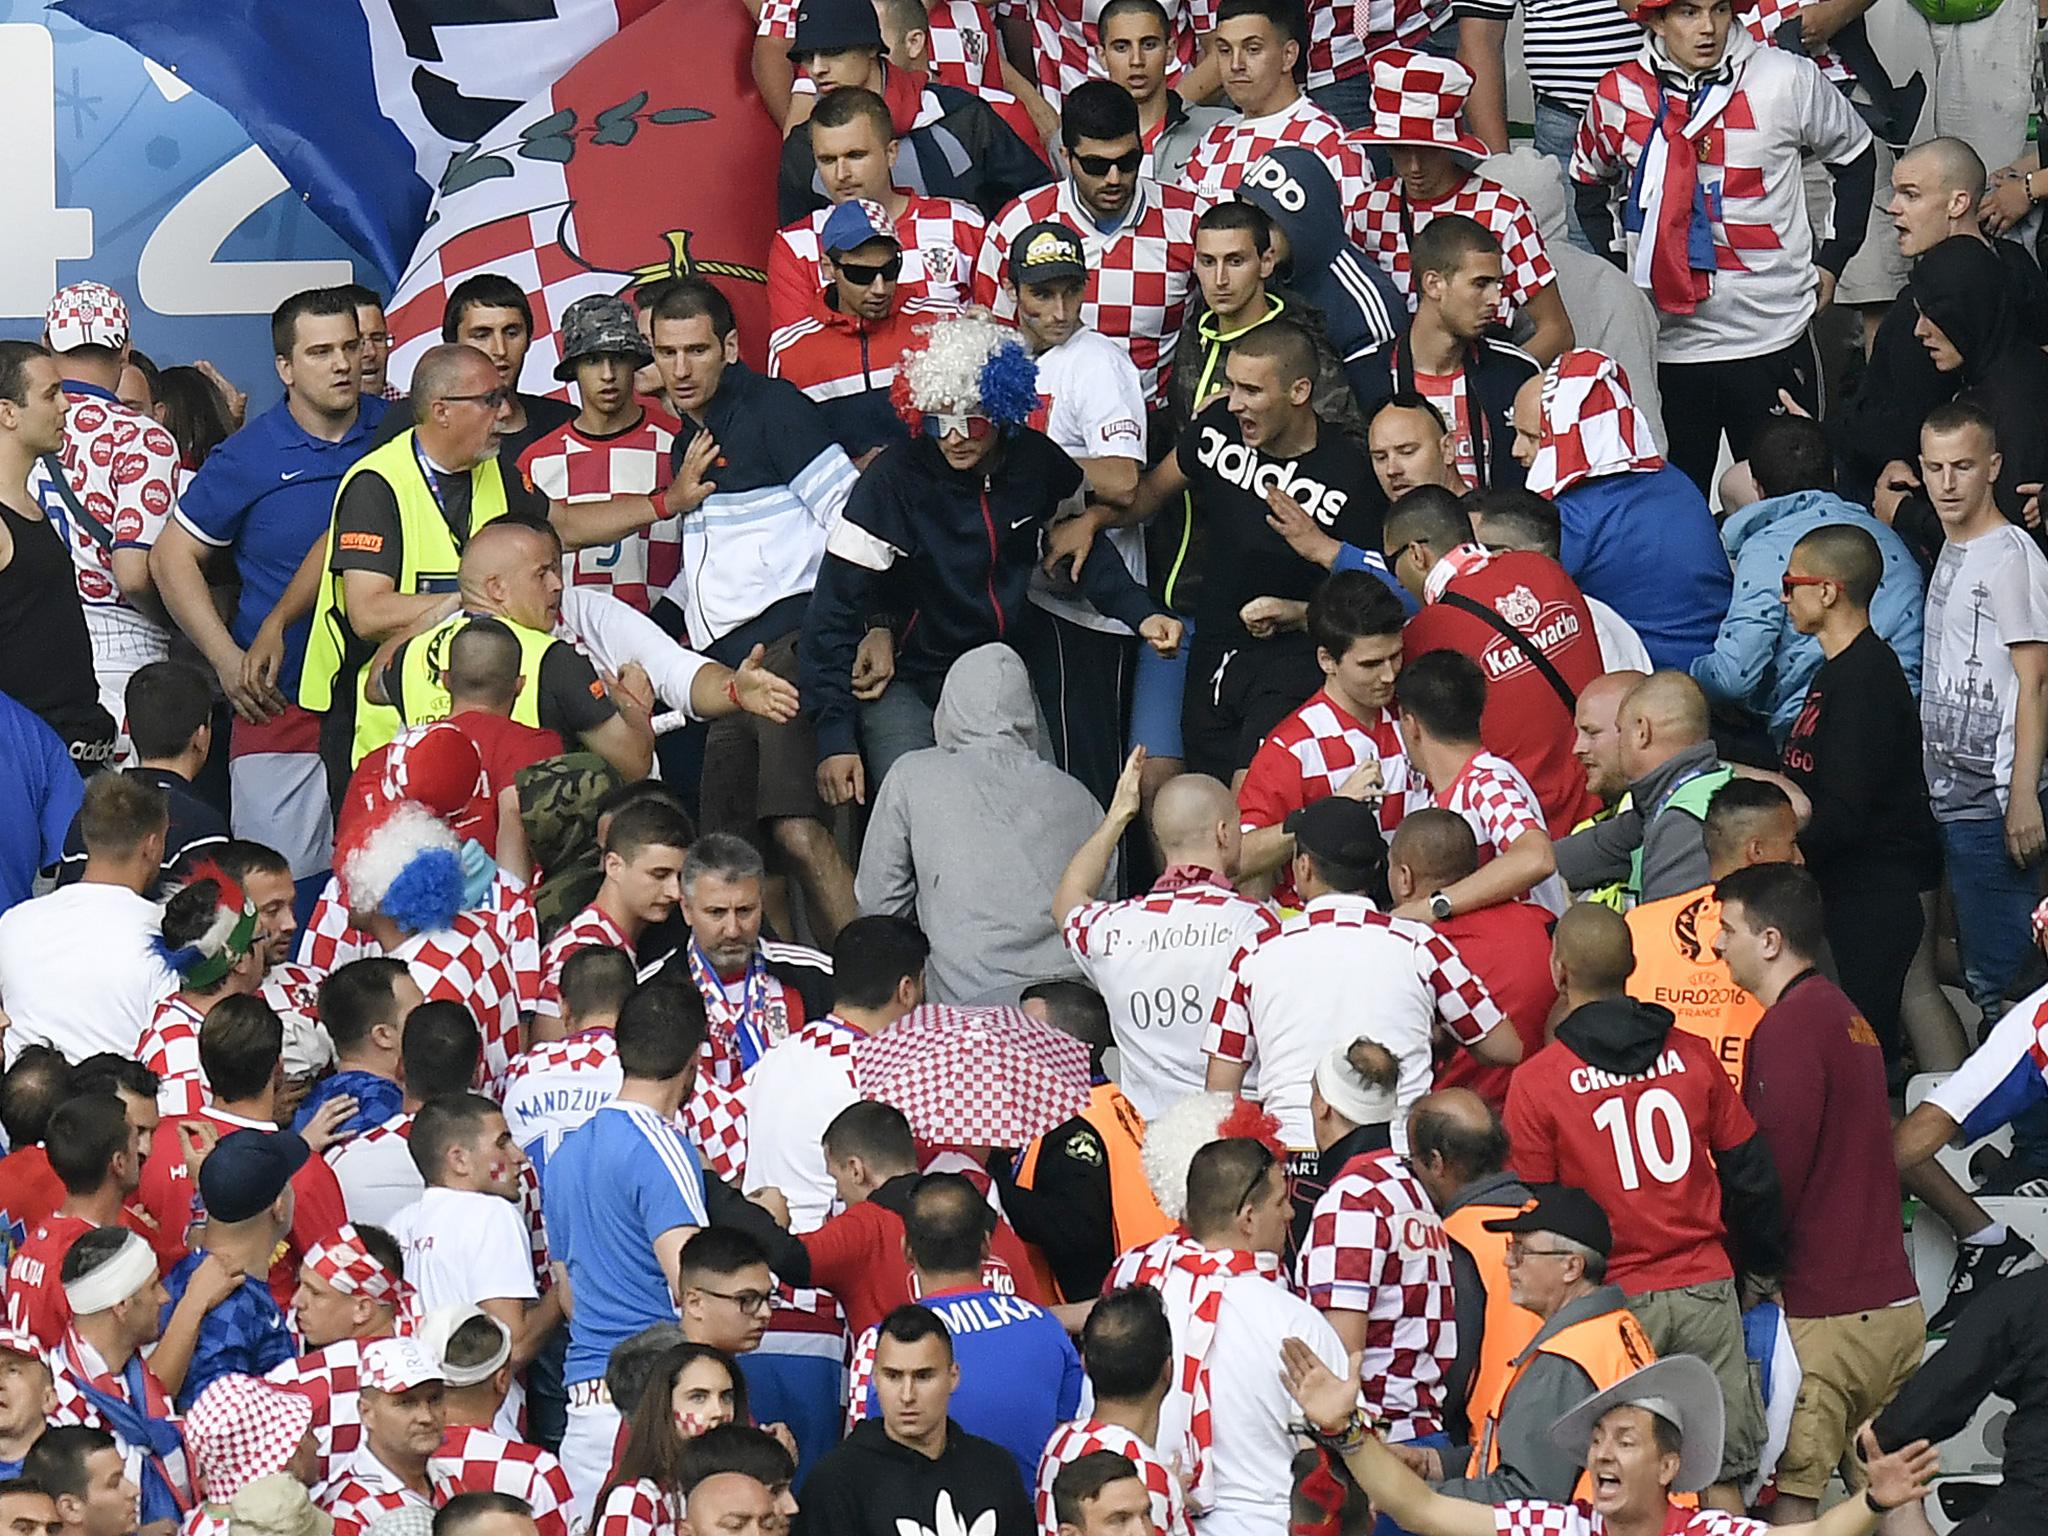 Croatia fans fighting in the stands during the game against the Czech Republic